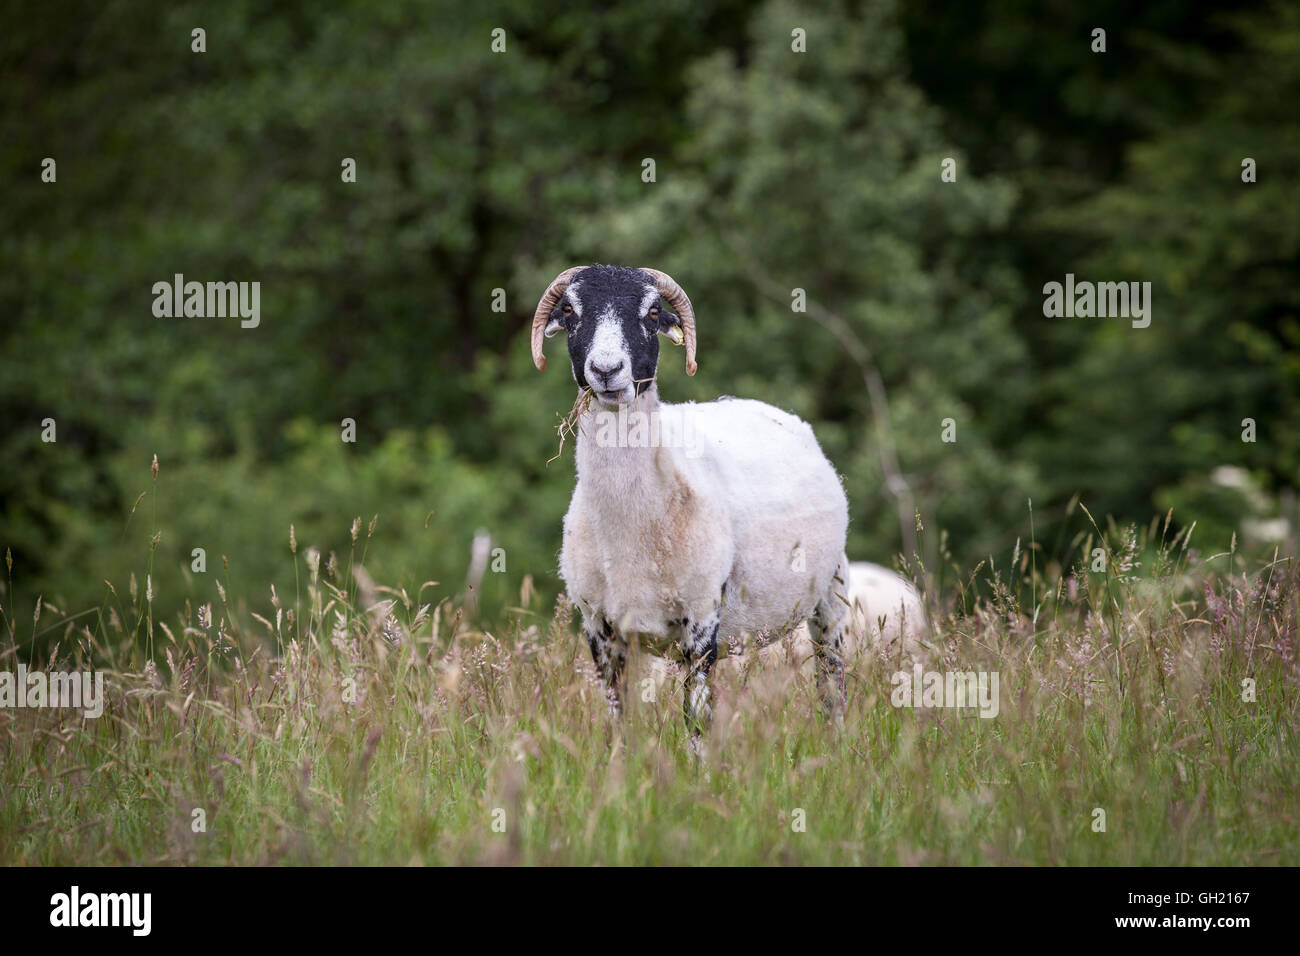 Sheep chewing grass looking at camera. She is outside in a field and is a Swaledale breed. Stock Photo